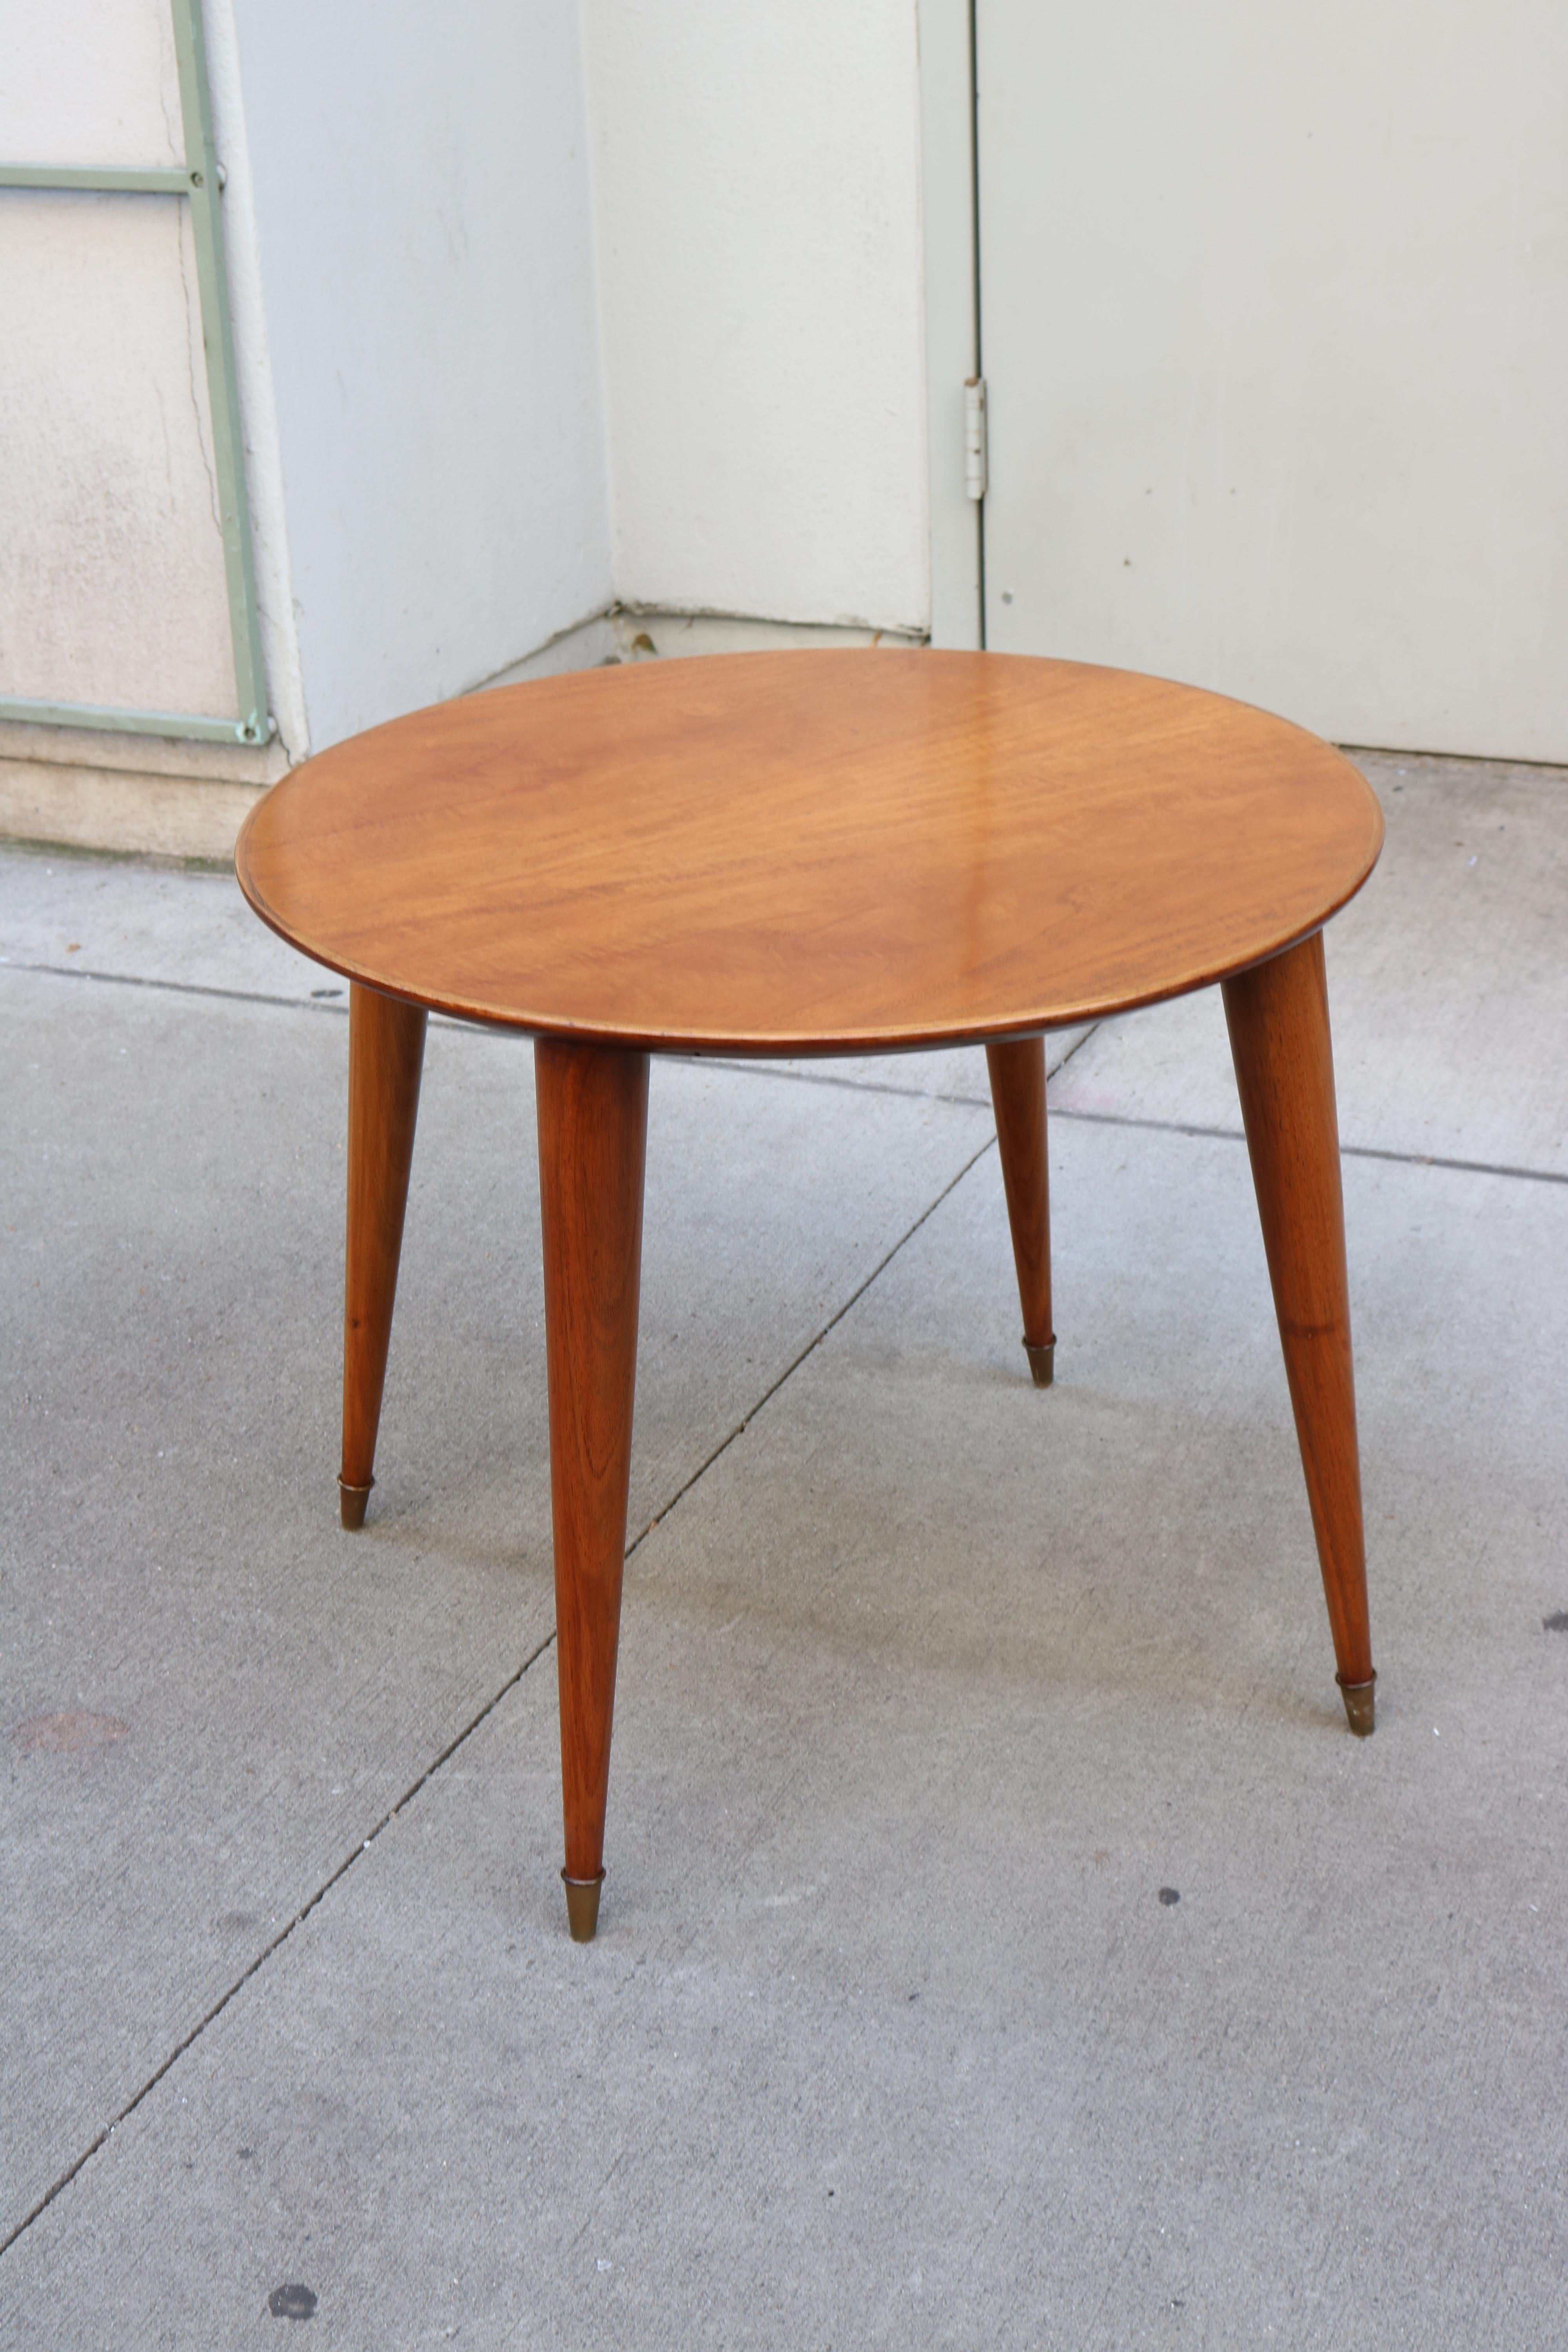 A round top side table in beechwood. 
Table resting on four legs ending in decorative brass sabots.